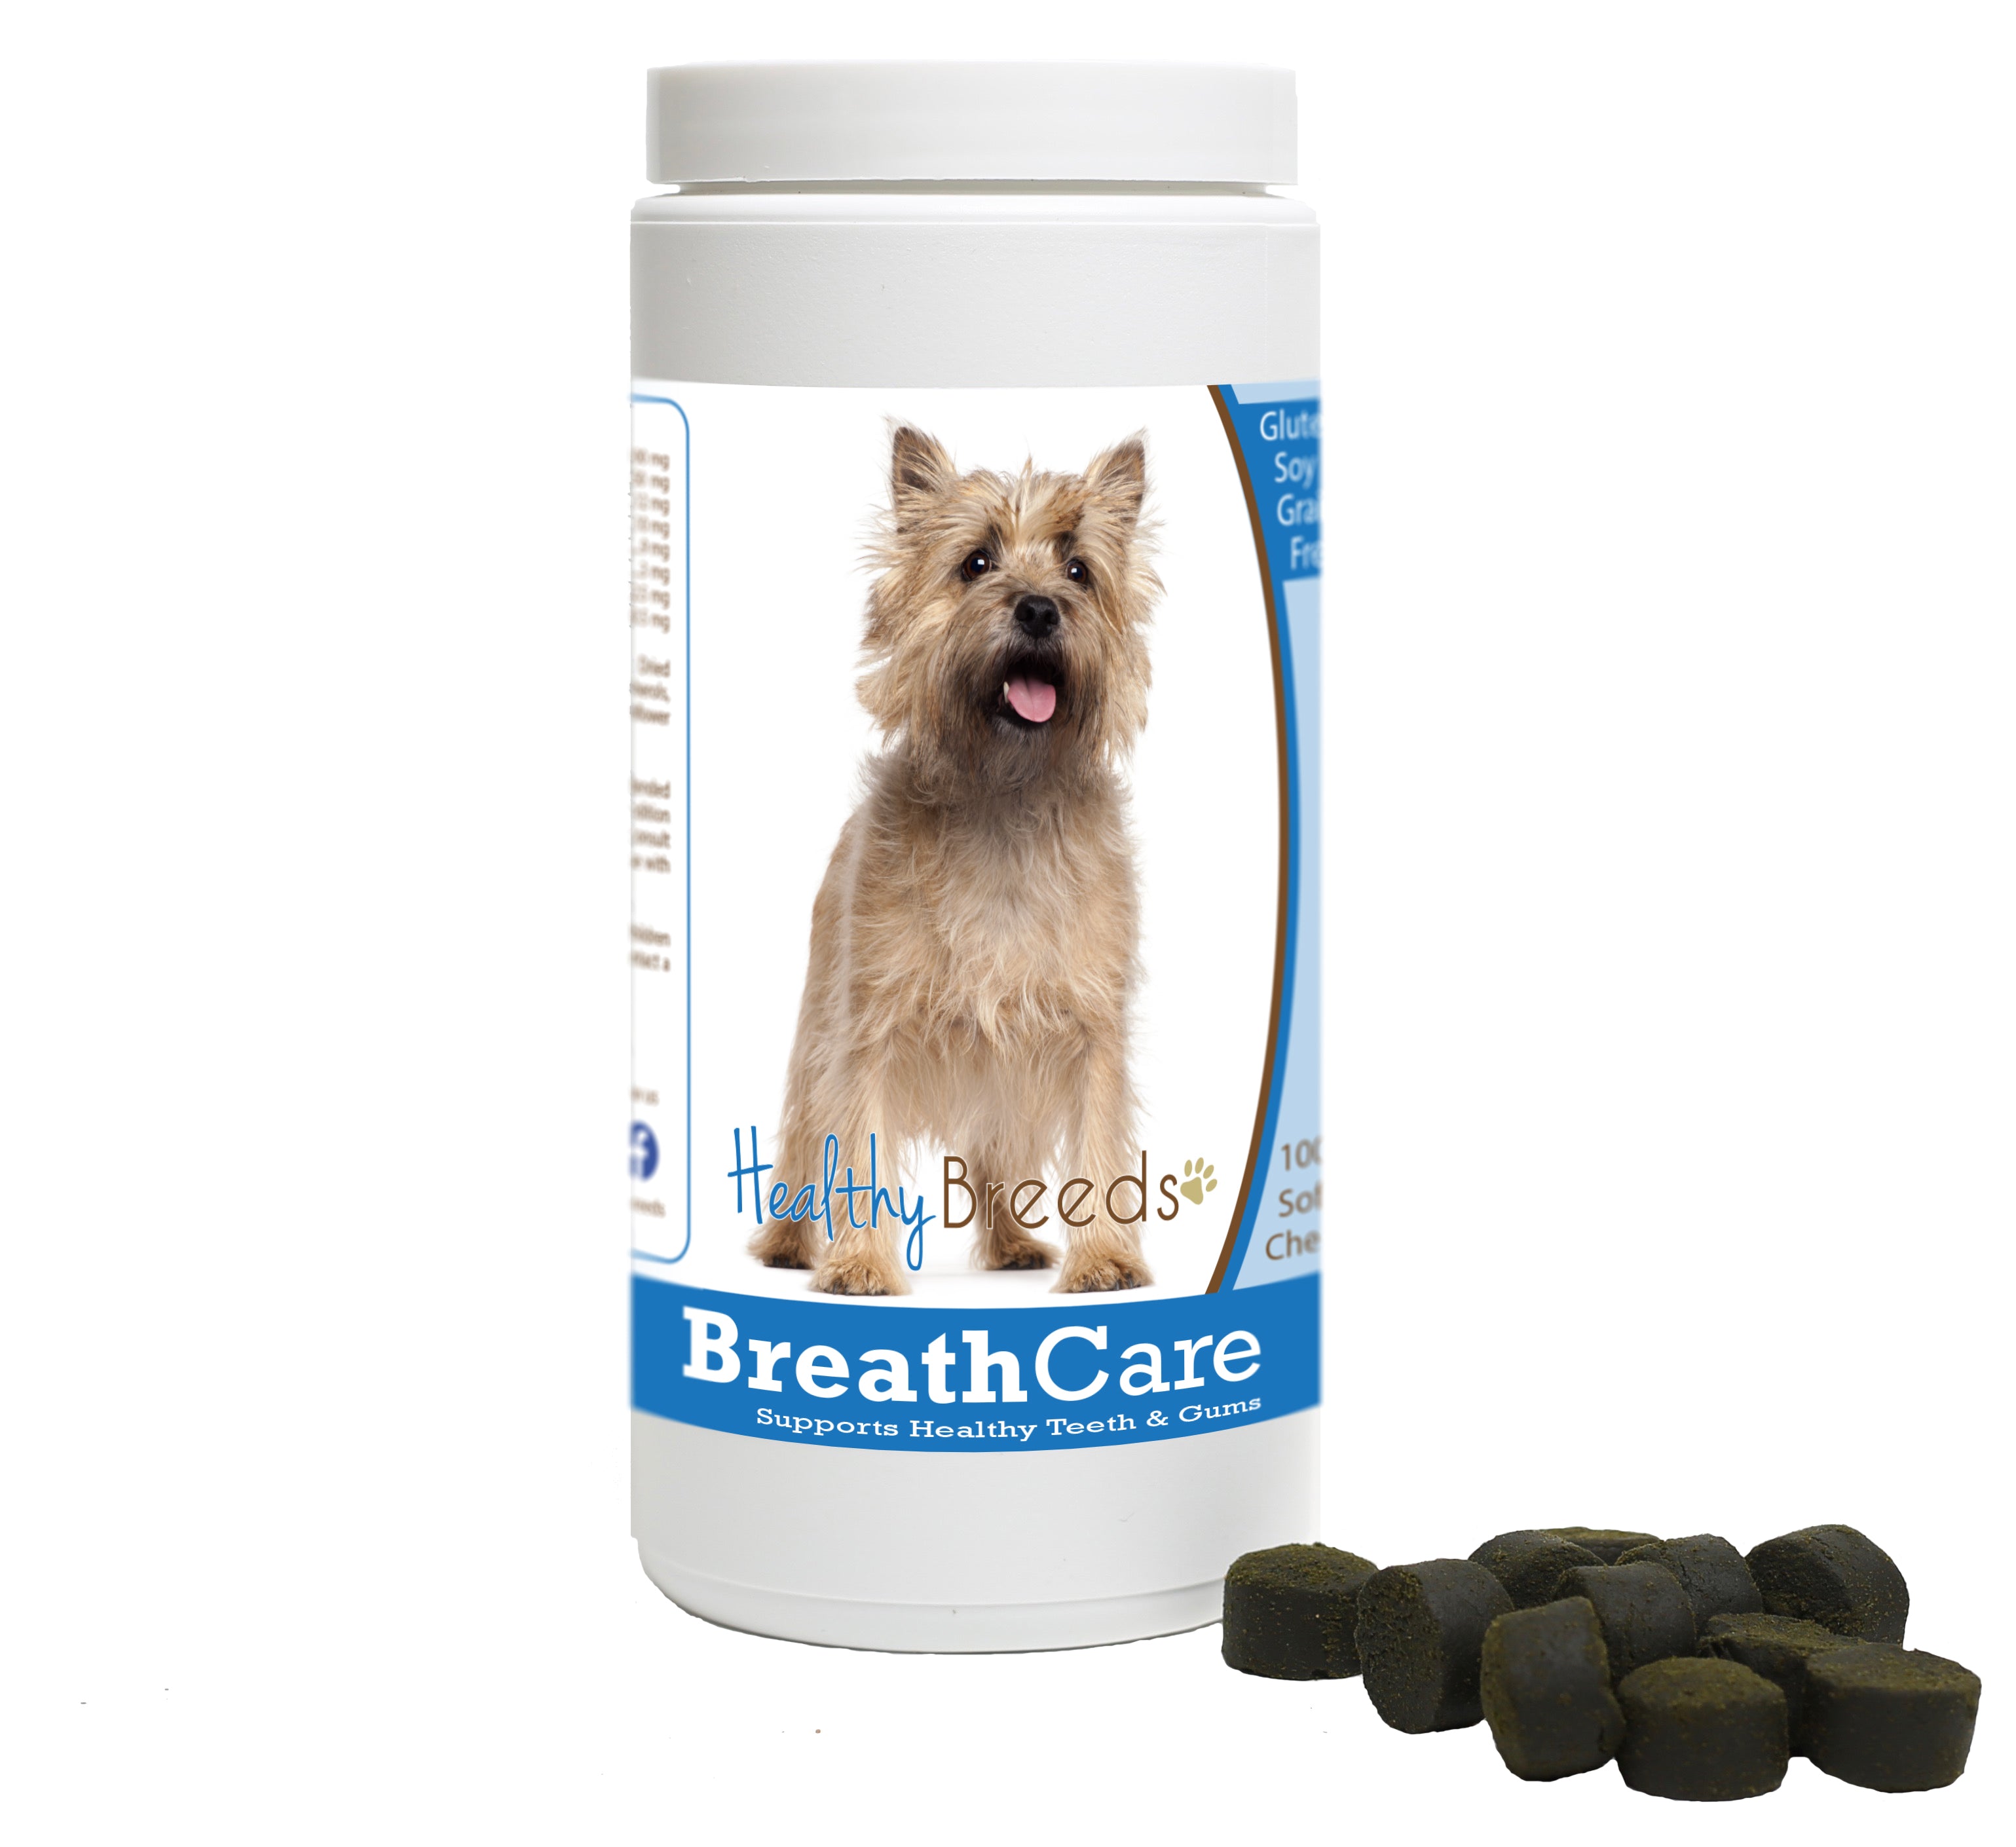 Cairn Terrier Breath Care Soft Chews for Dogs 60 Count